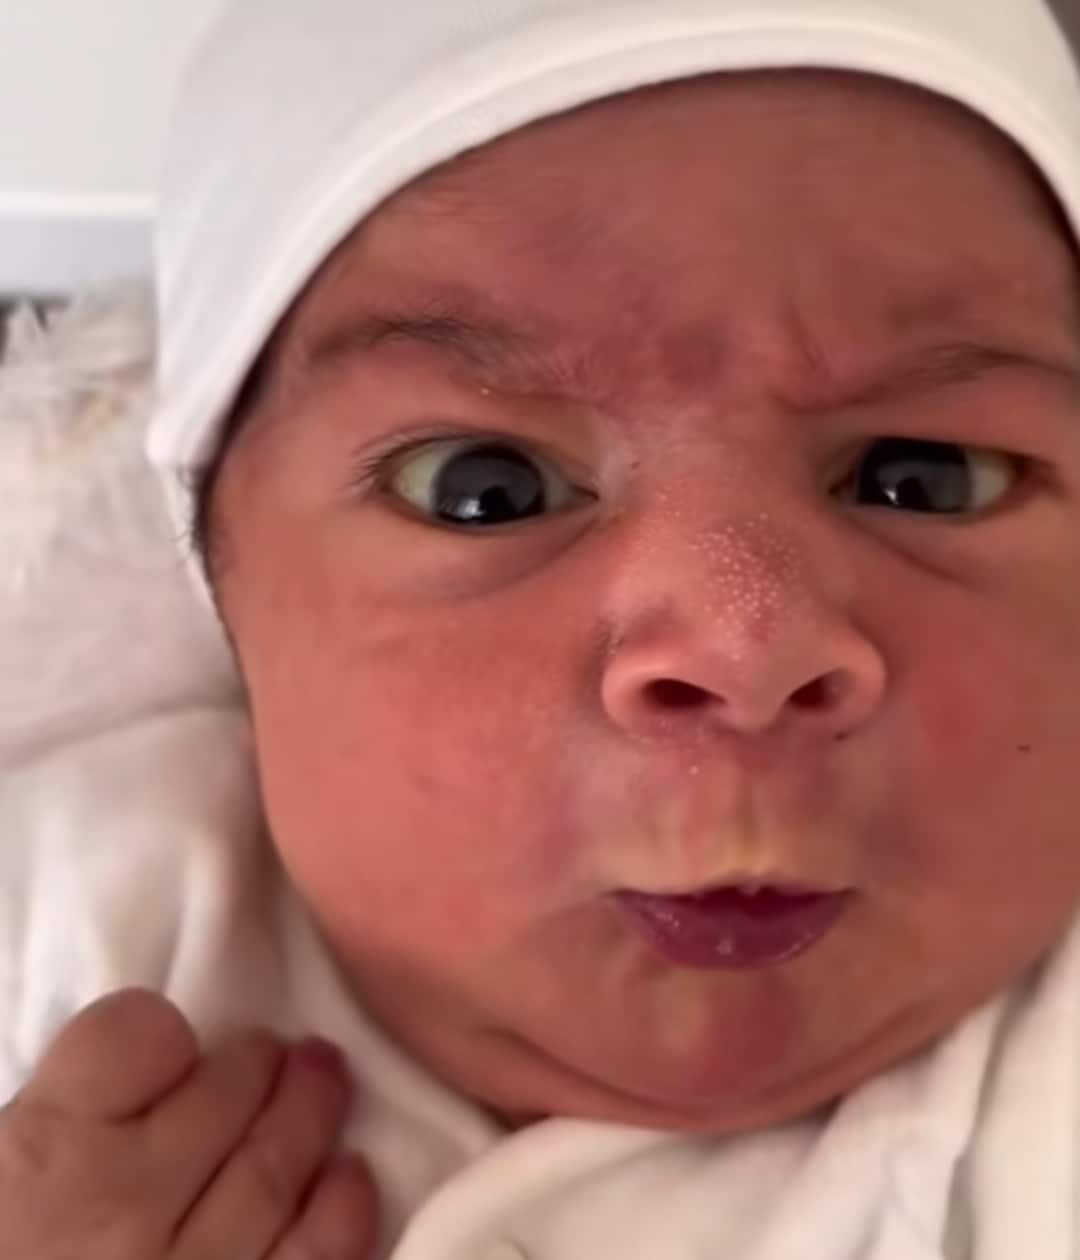 "Am I born in a rich family or not?" - Internet erupts with laughter over a baby's facial expression at birth